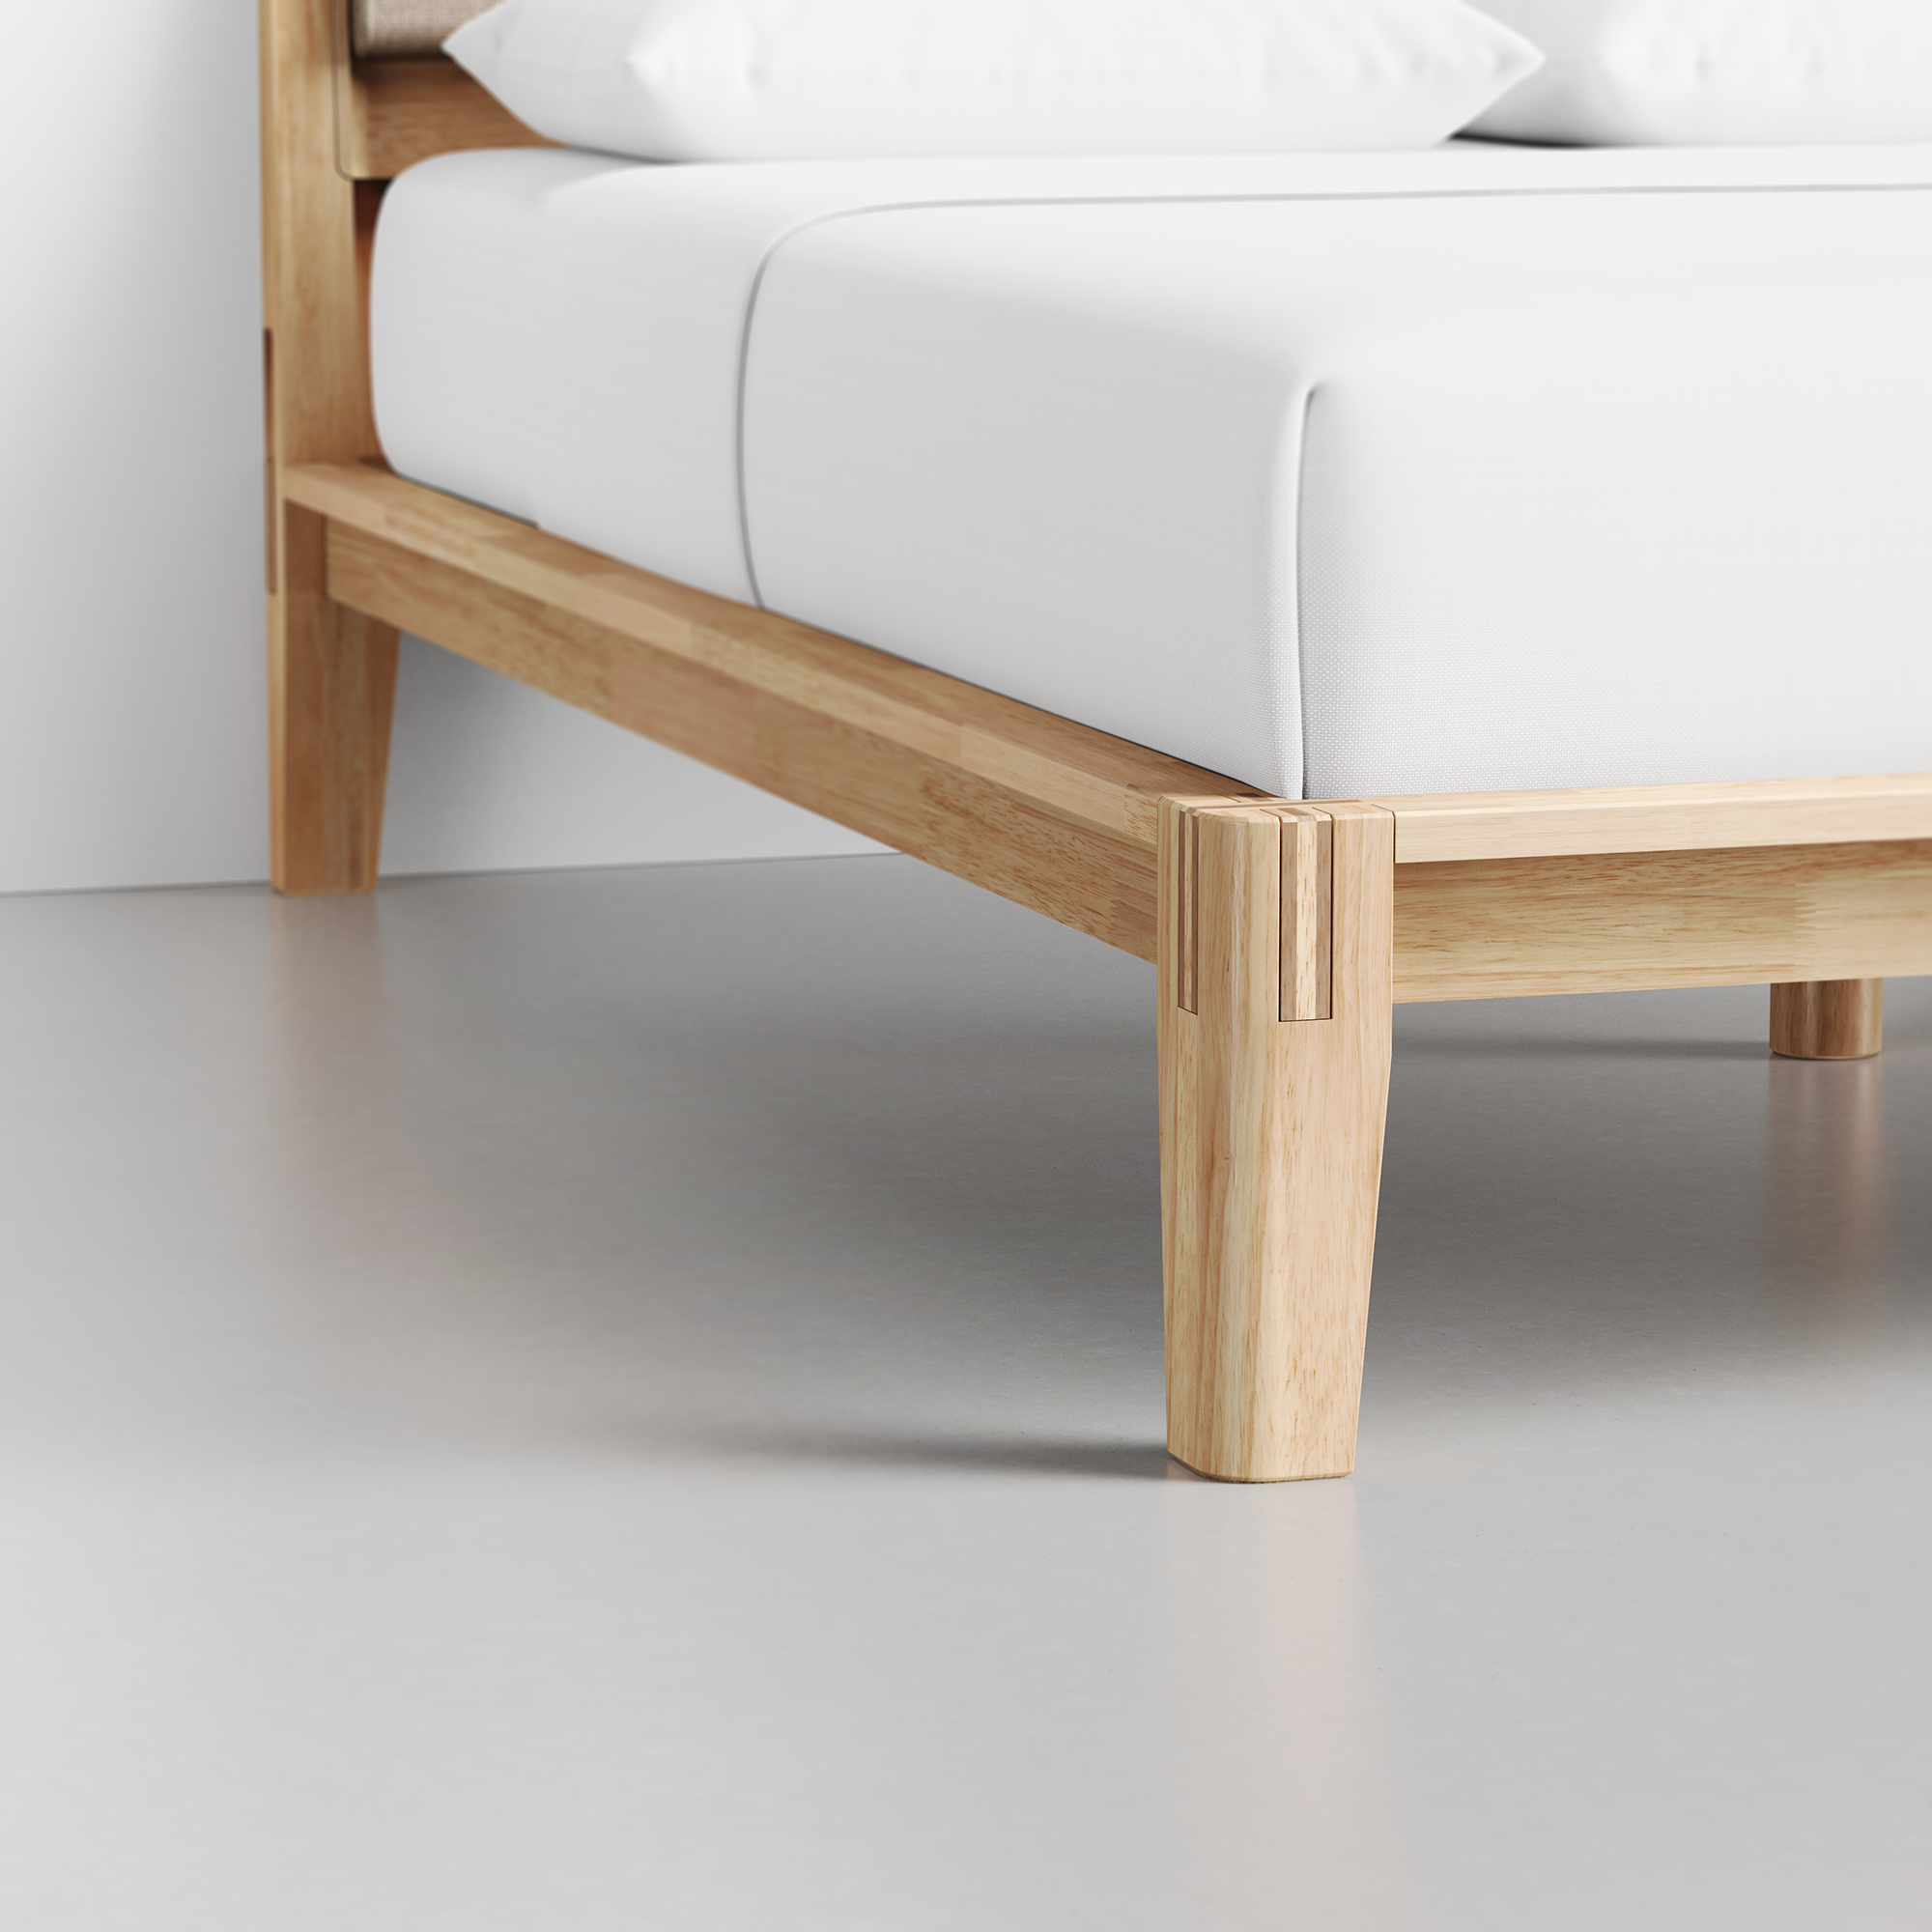 The Bed (Natural / HB Cushion Dune) - Render - Foot Detail